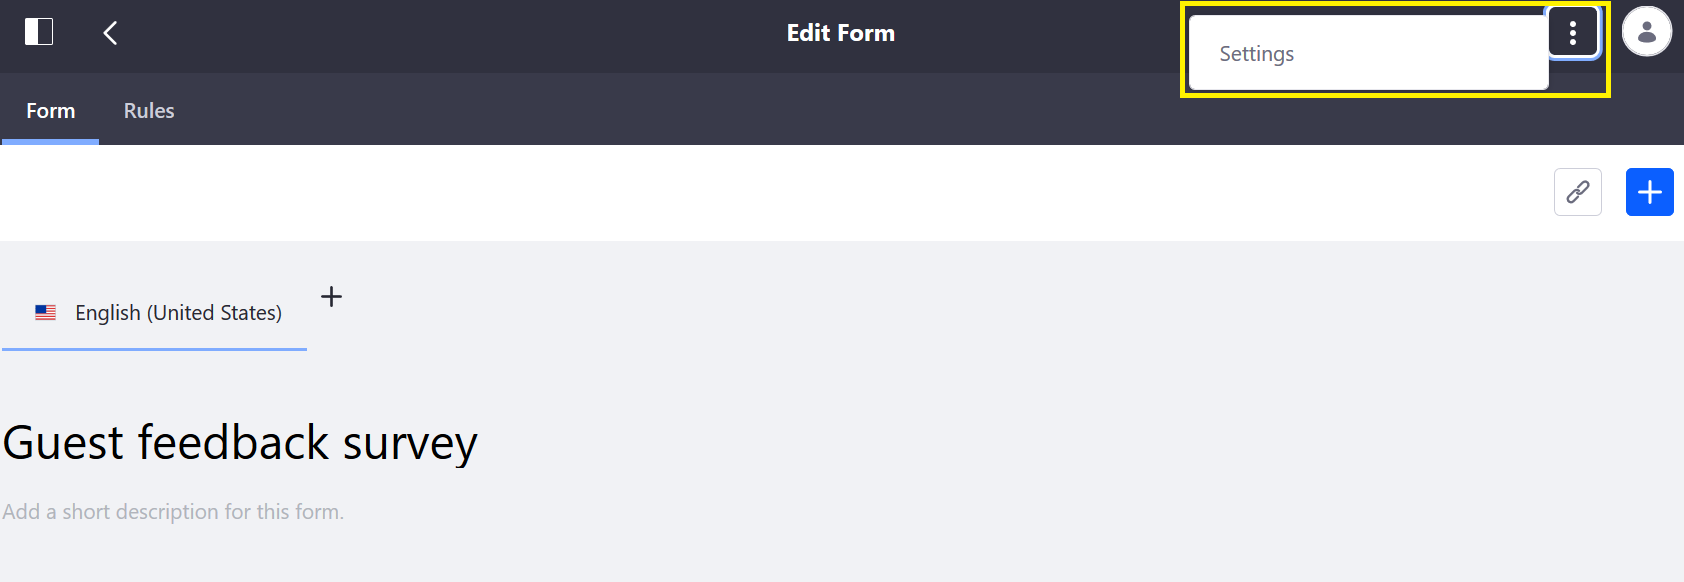 Navigate to the Form settings